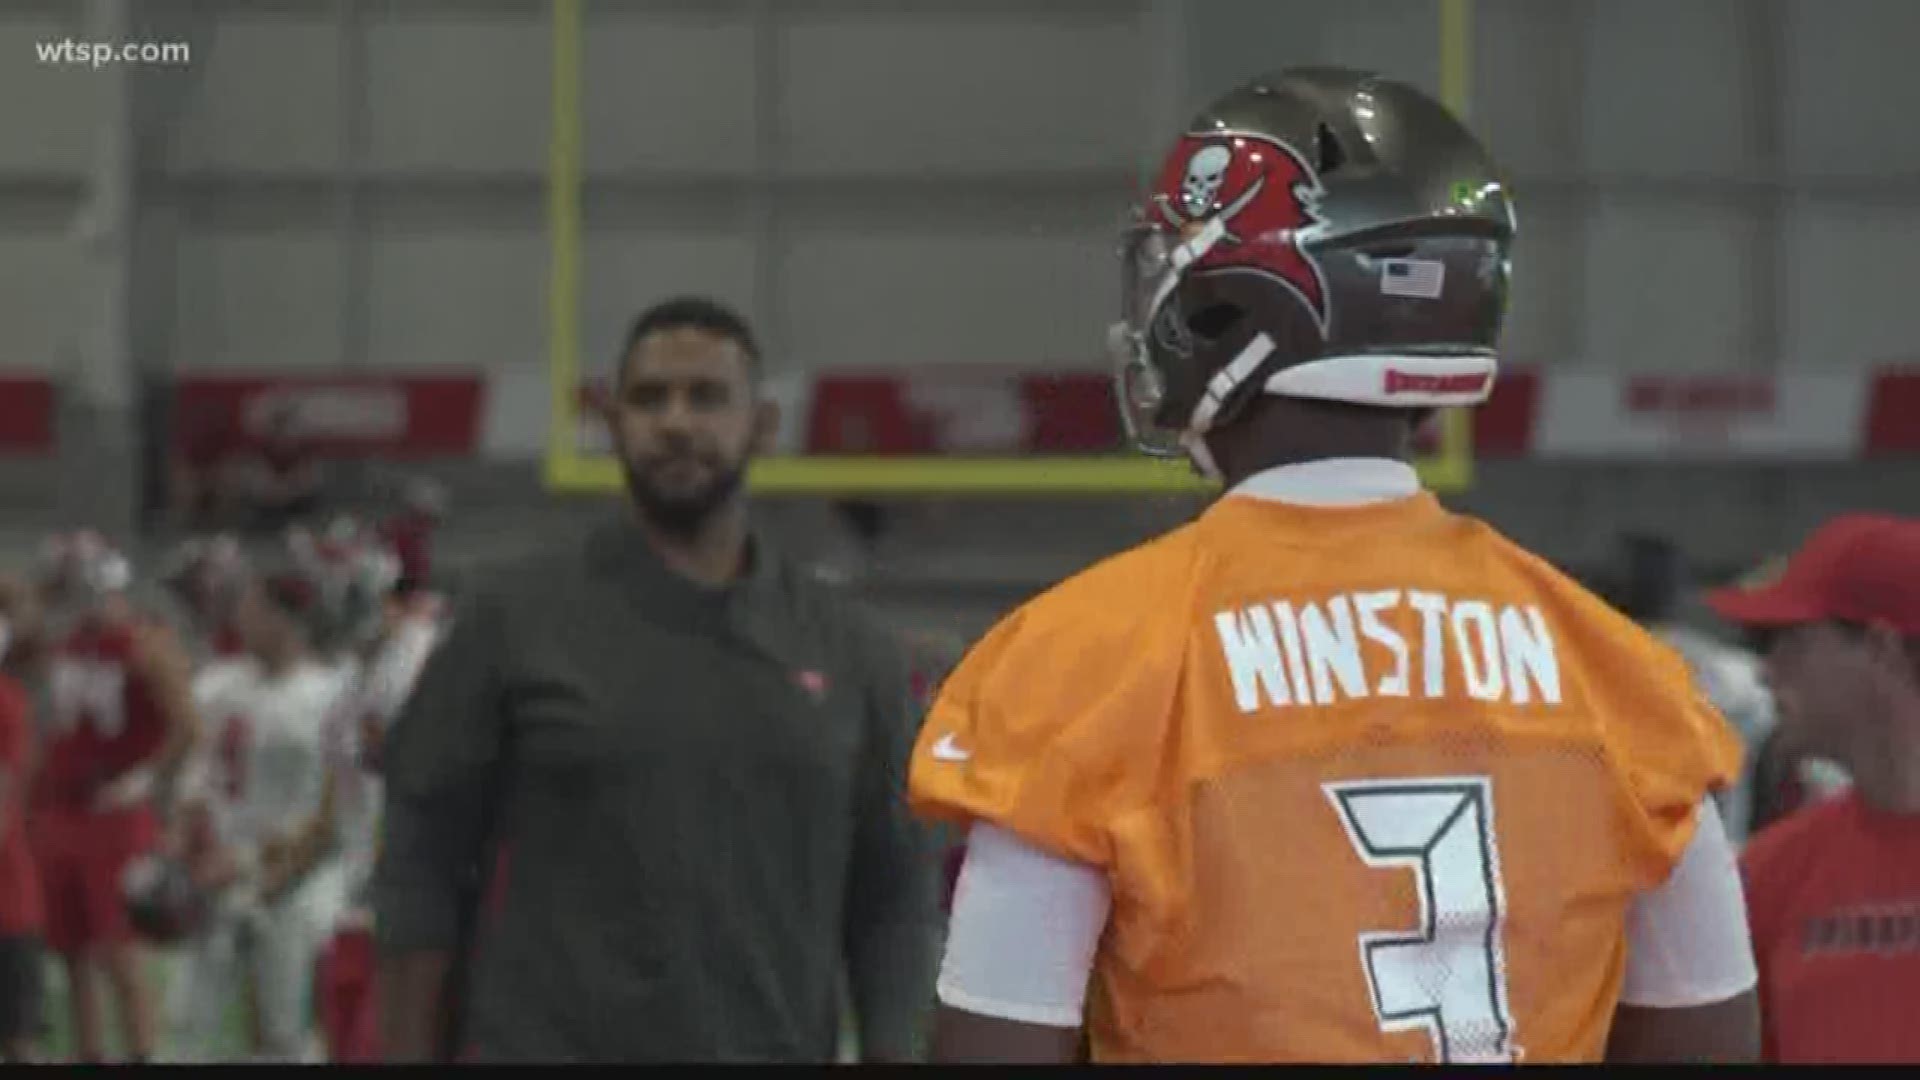 The Tampa Bay Buccaneers have announced the team’s training camp schedule.

It includes 11 practices open to the public, and an additional four practices for season pass members, the military and other select guests.

A free digital ticket on the team’s website is required for entry to all practice sessions. Most practices will be held outside on the two primary practice fields at AdventHealth Training Center and will feature covered bleacher seating for fans.